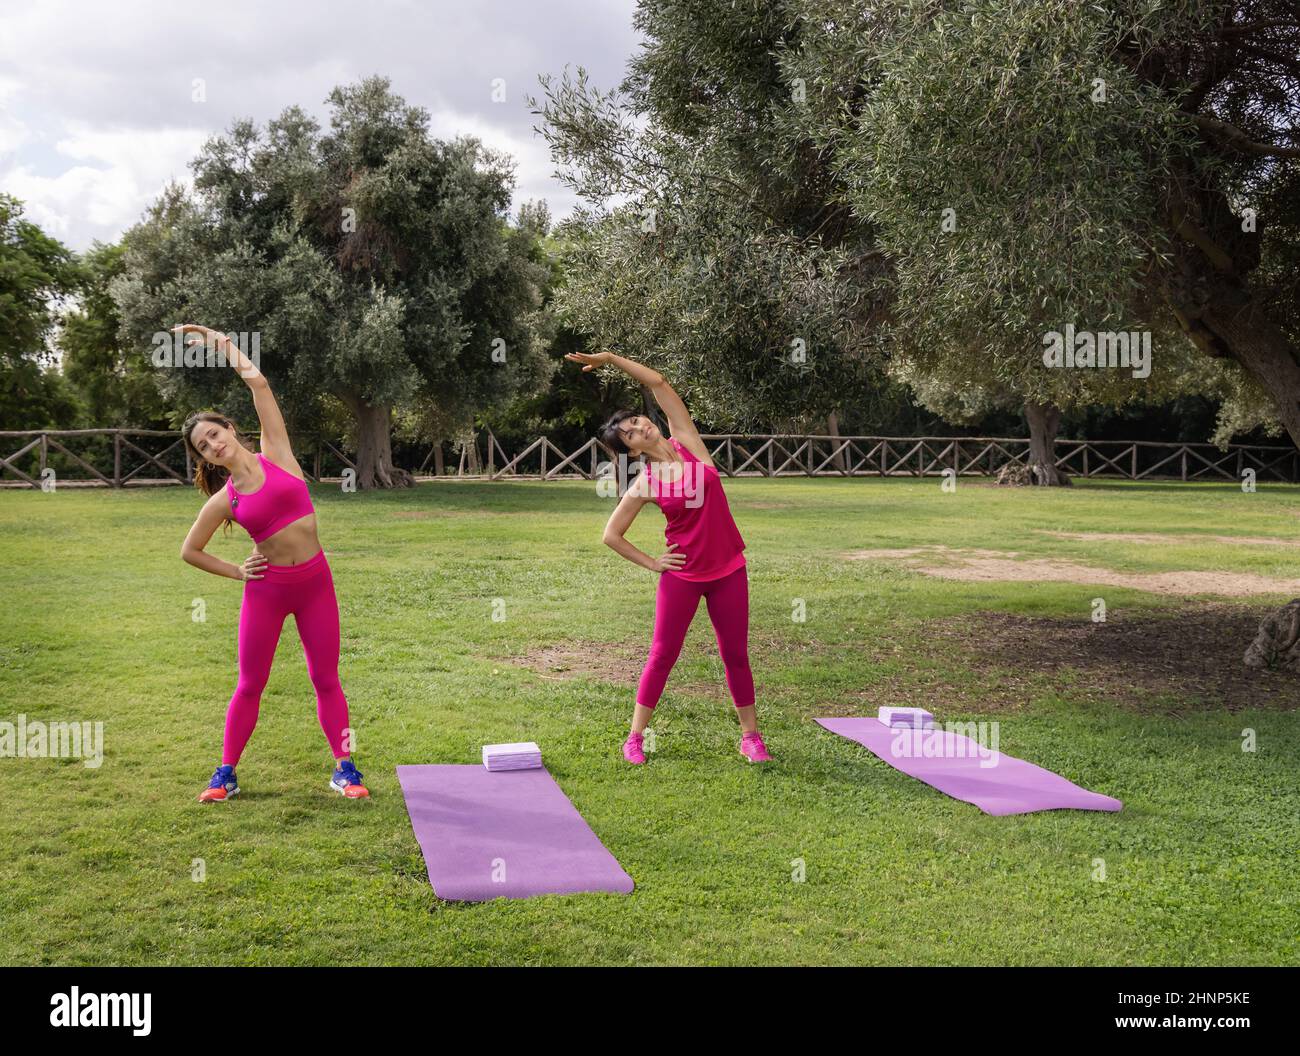 Two barefoot women practicing fitness or stretching in park on summer Stock Photo